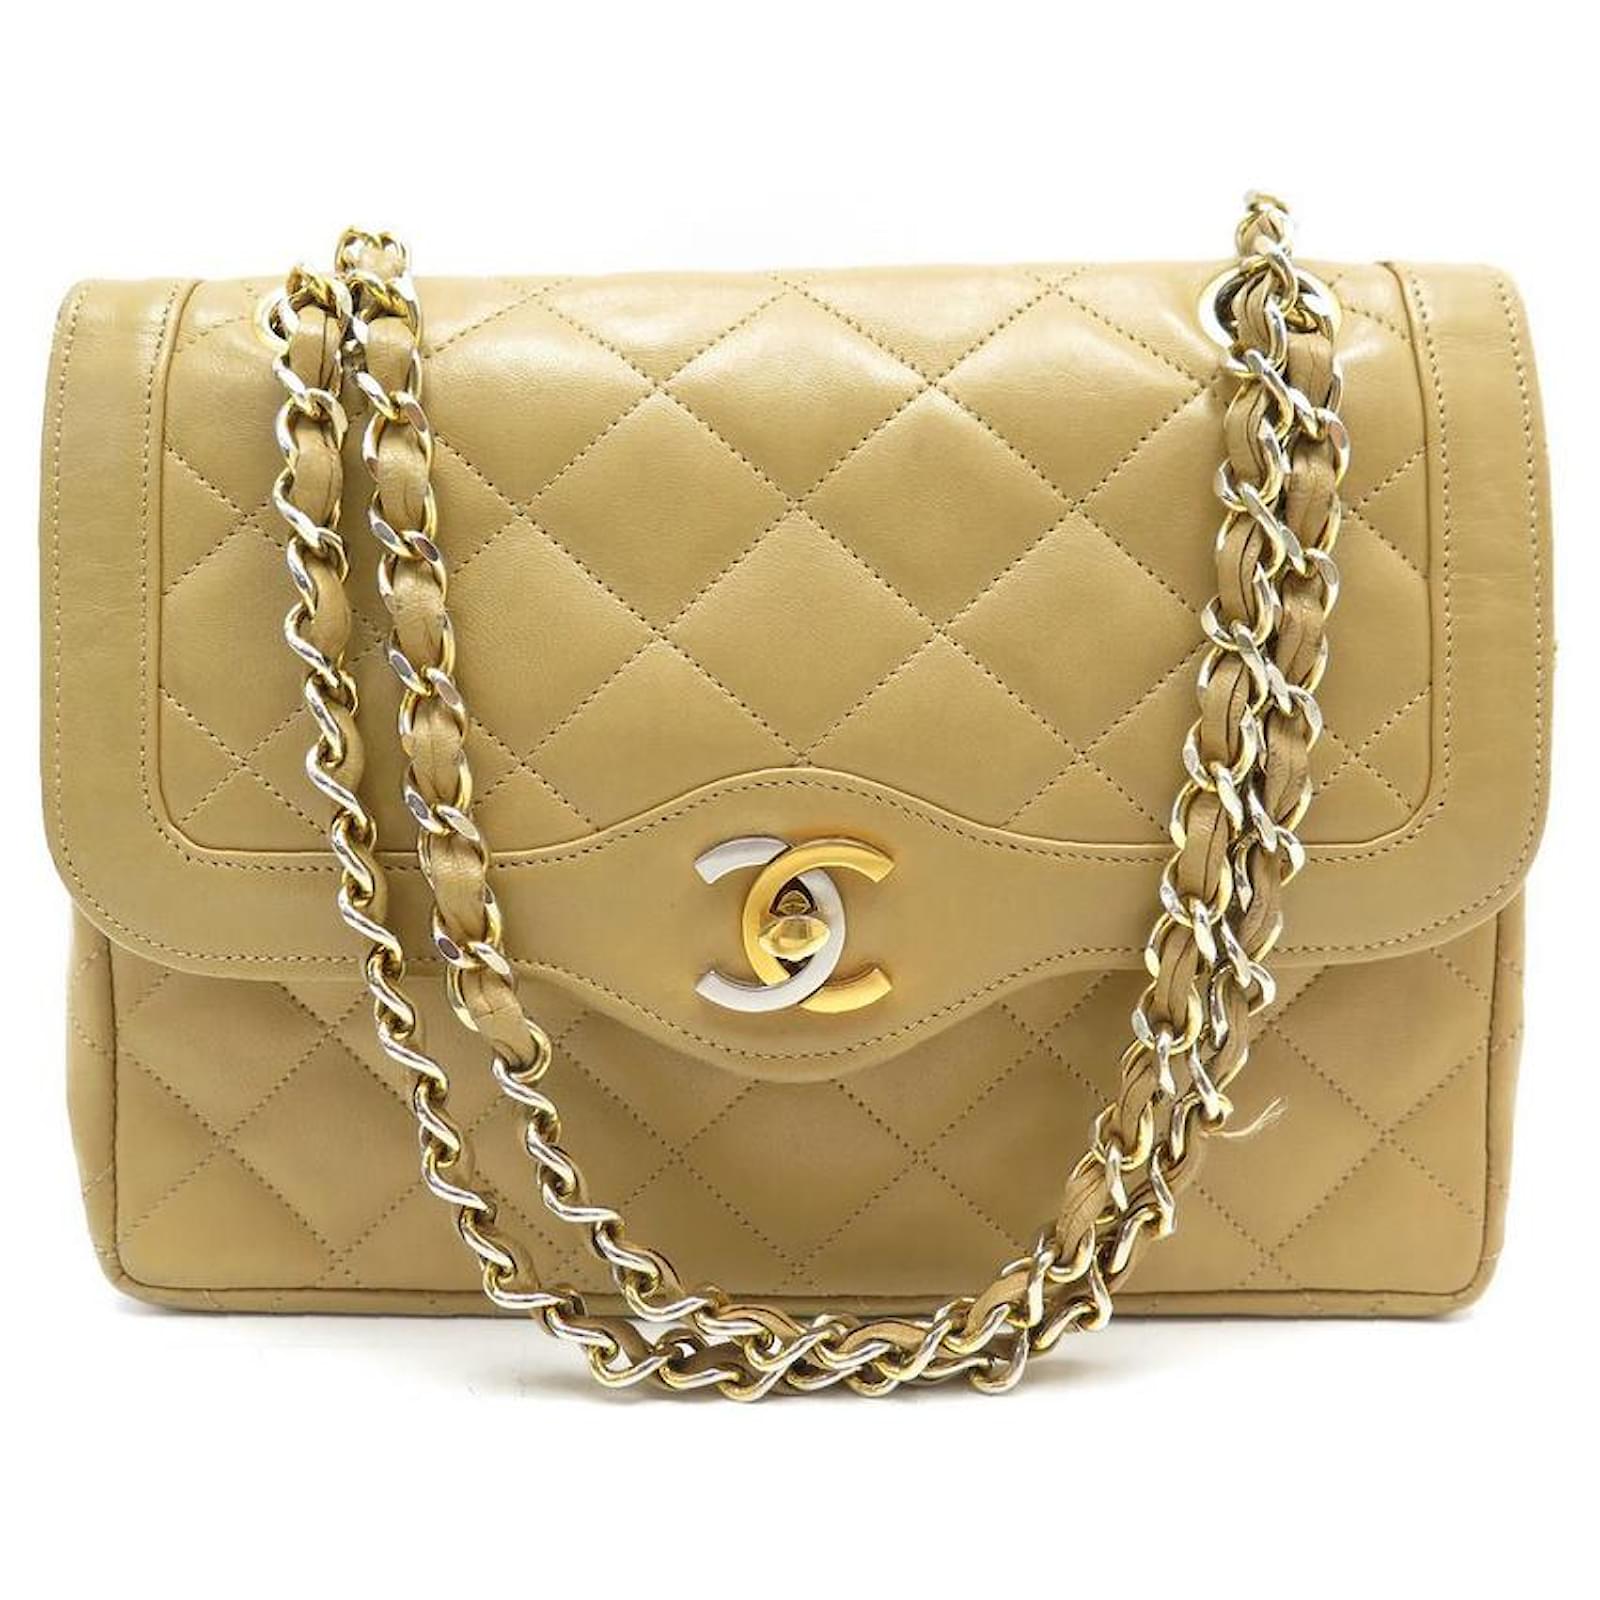 VINTAGE CHANEL TIMELESS CLASSIC HANDBAG BEIGE QUILTED LEATHER HAND BAG ref.685139 picture